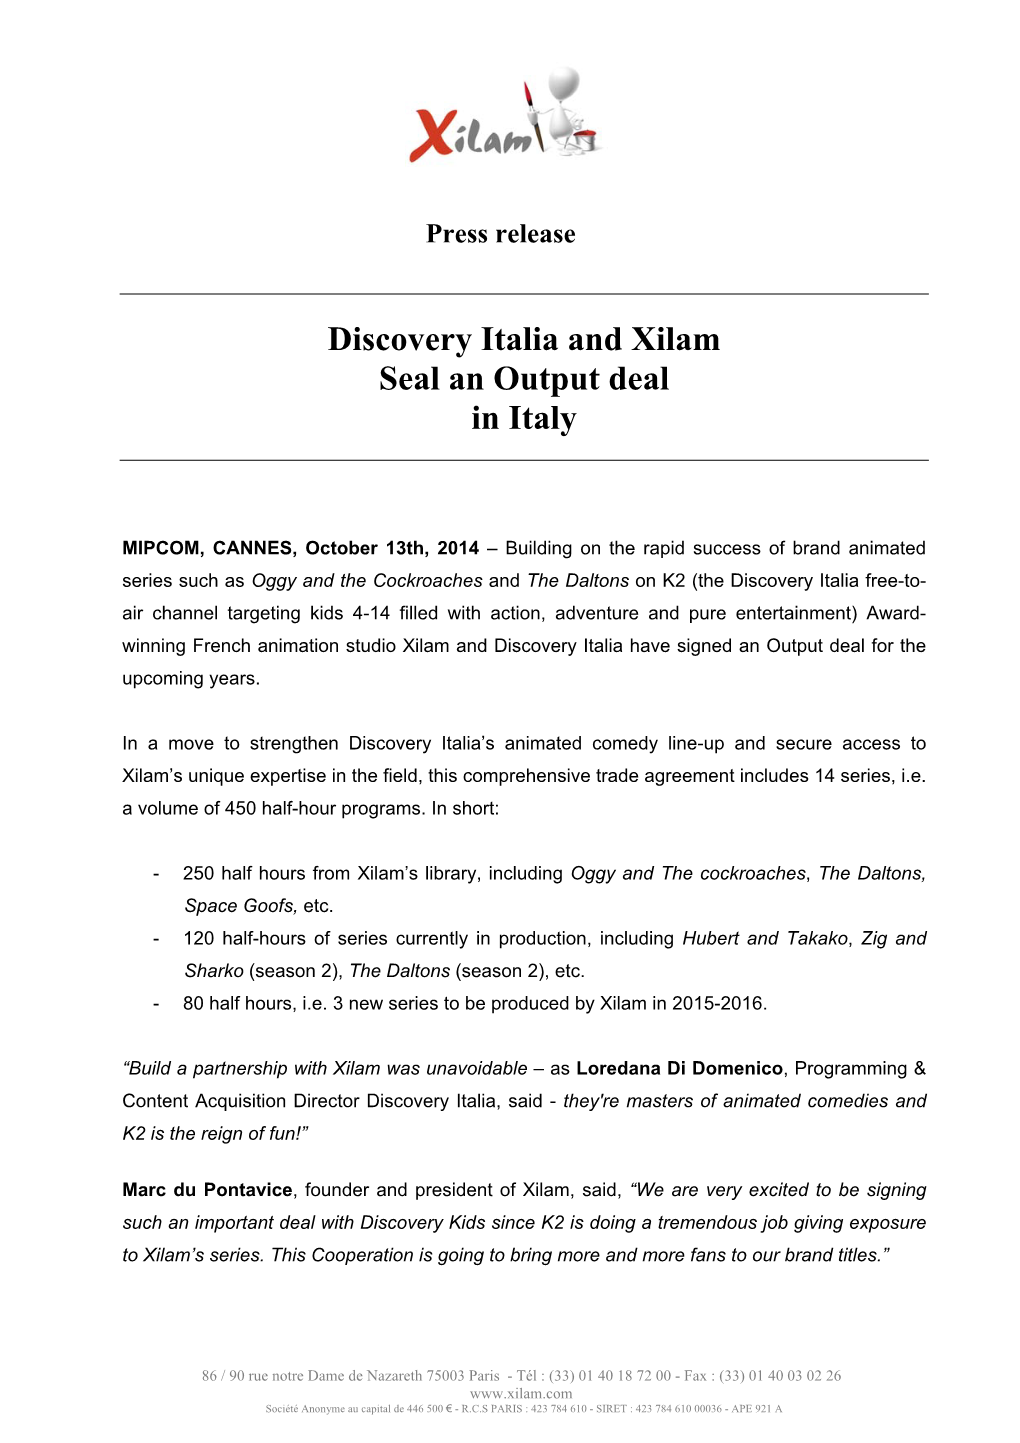 Discovery Italia and Xilam Seal an Output Deal in Italy